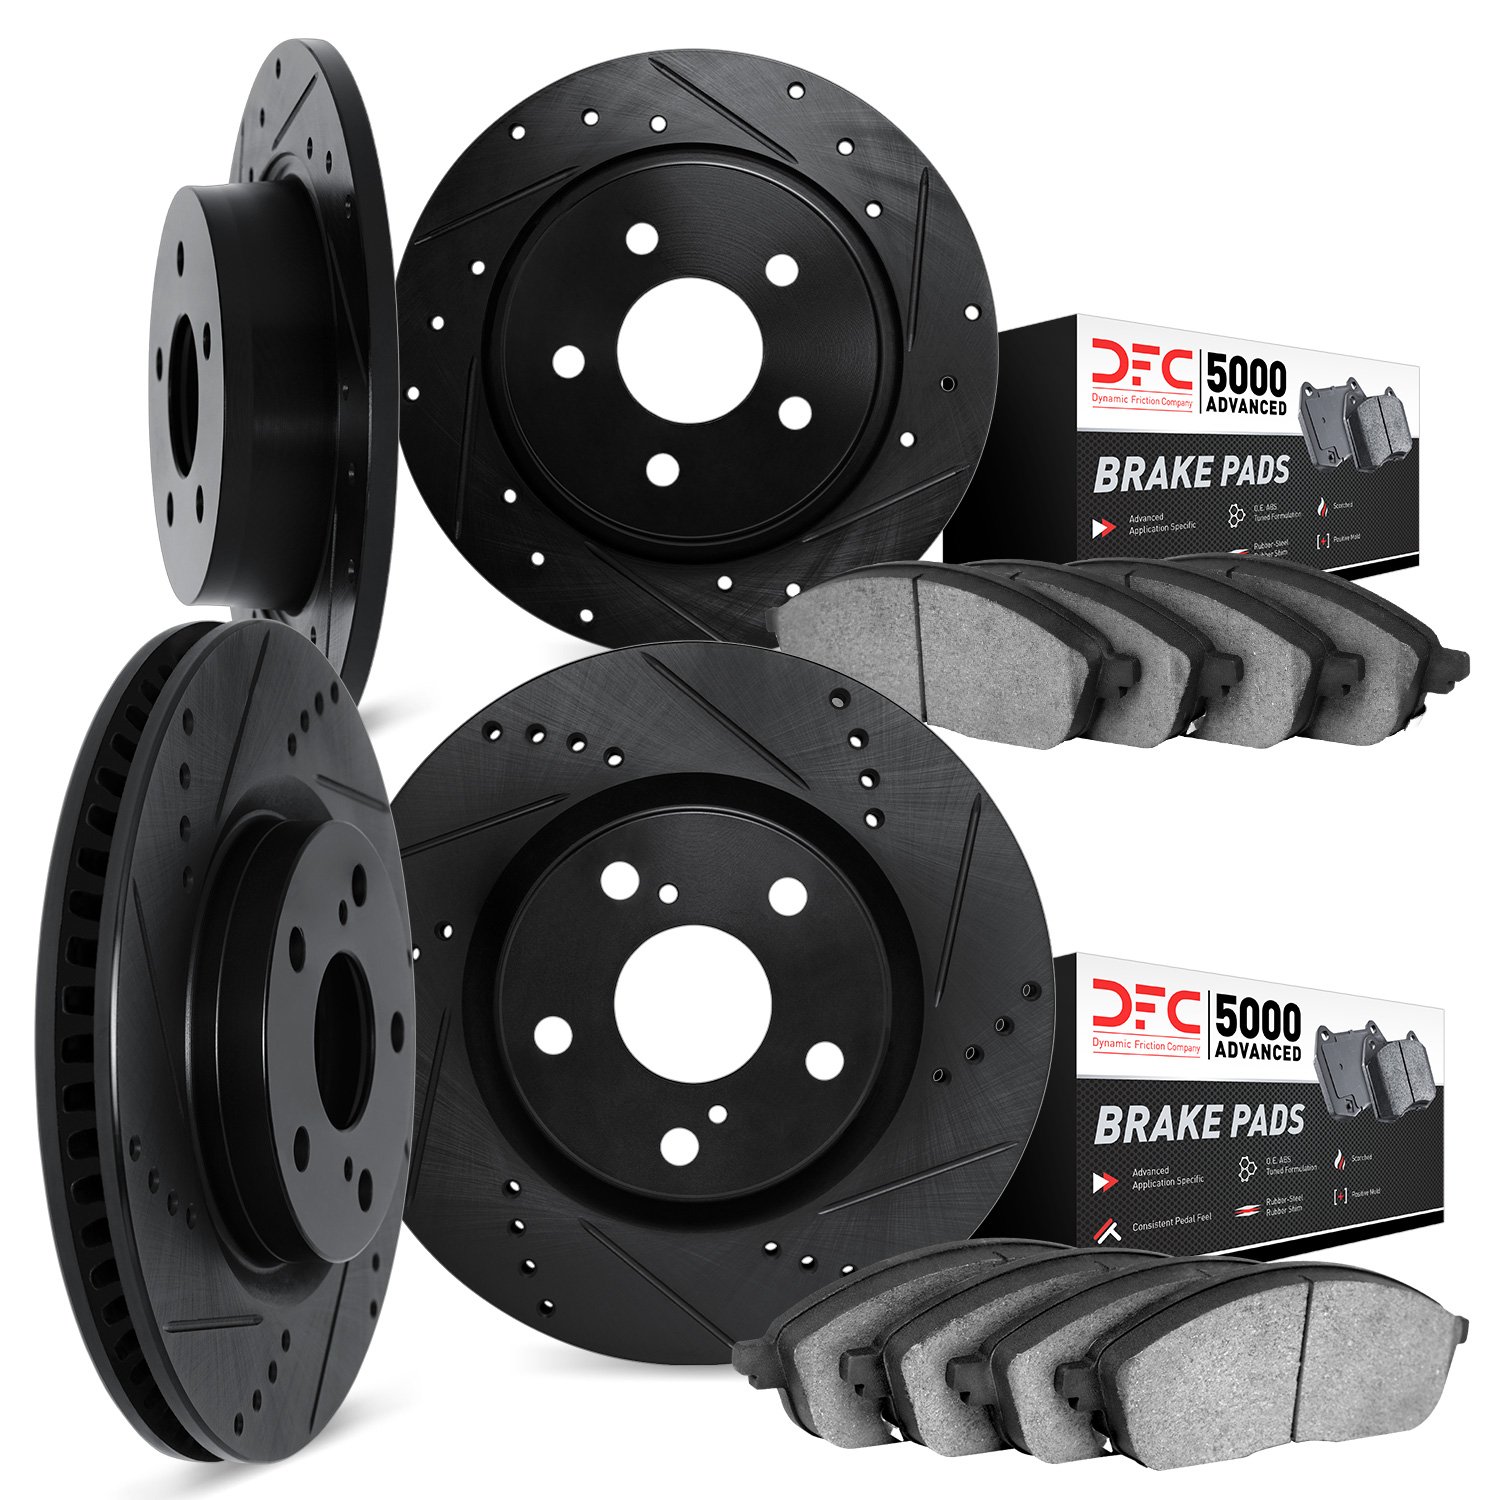 8504-45020 Drilled/Slotted Brake Rotors w/5000 Advanced Brake Pads Kit [Black], 1997-1998 GM, Position: Front and Rear